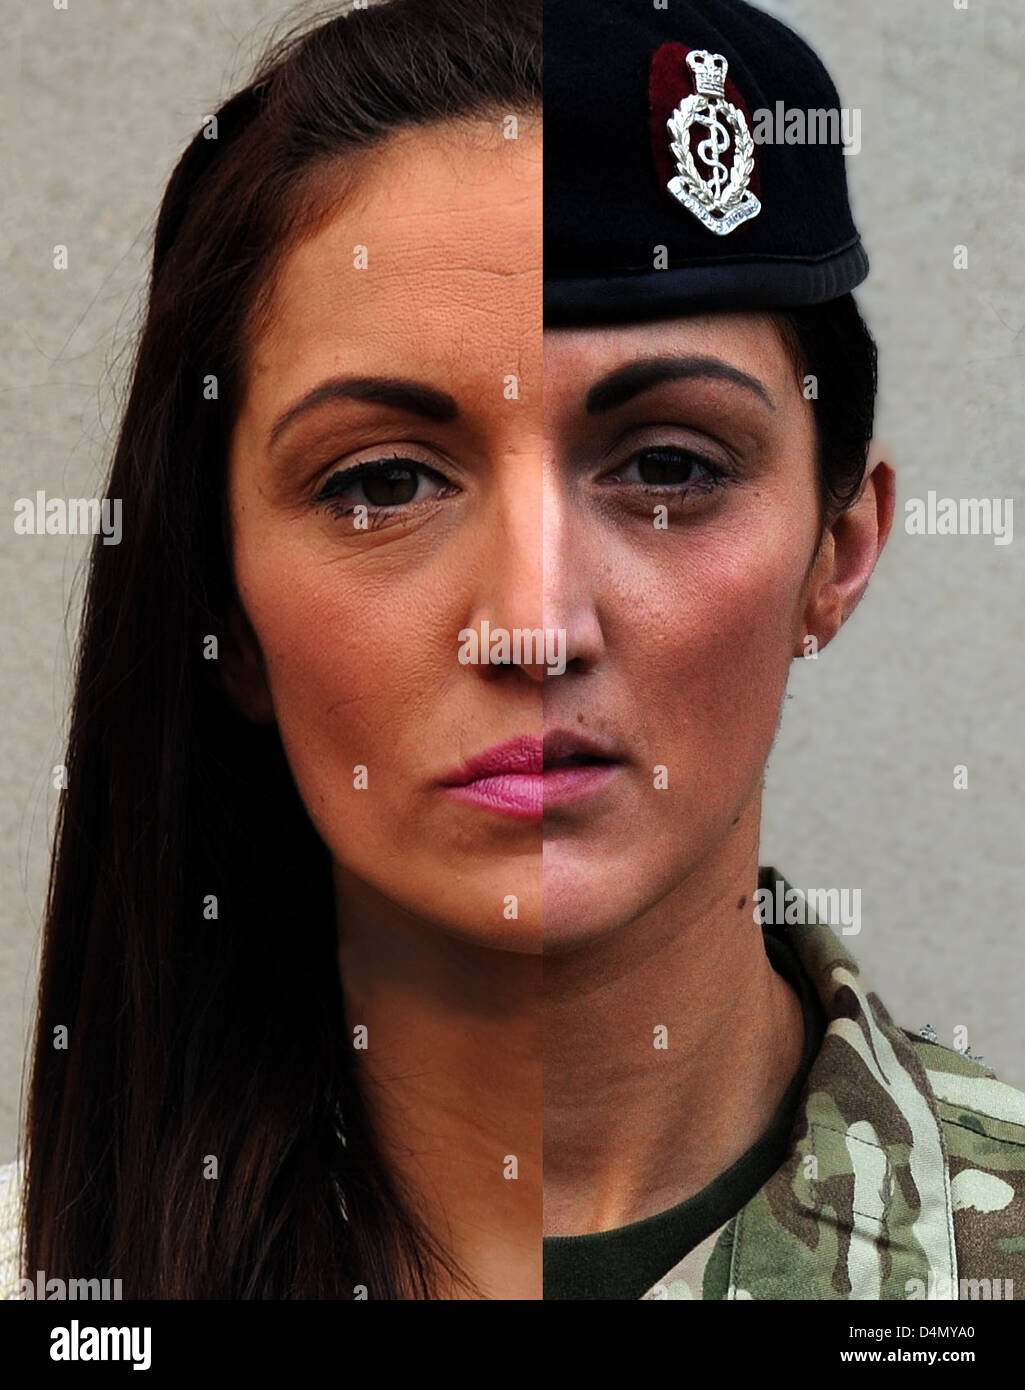 Soldiers during there transition from army life to civilian life Stock Photo